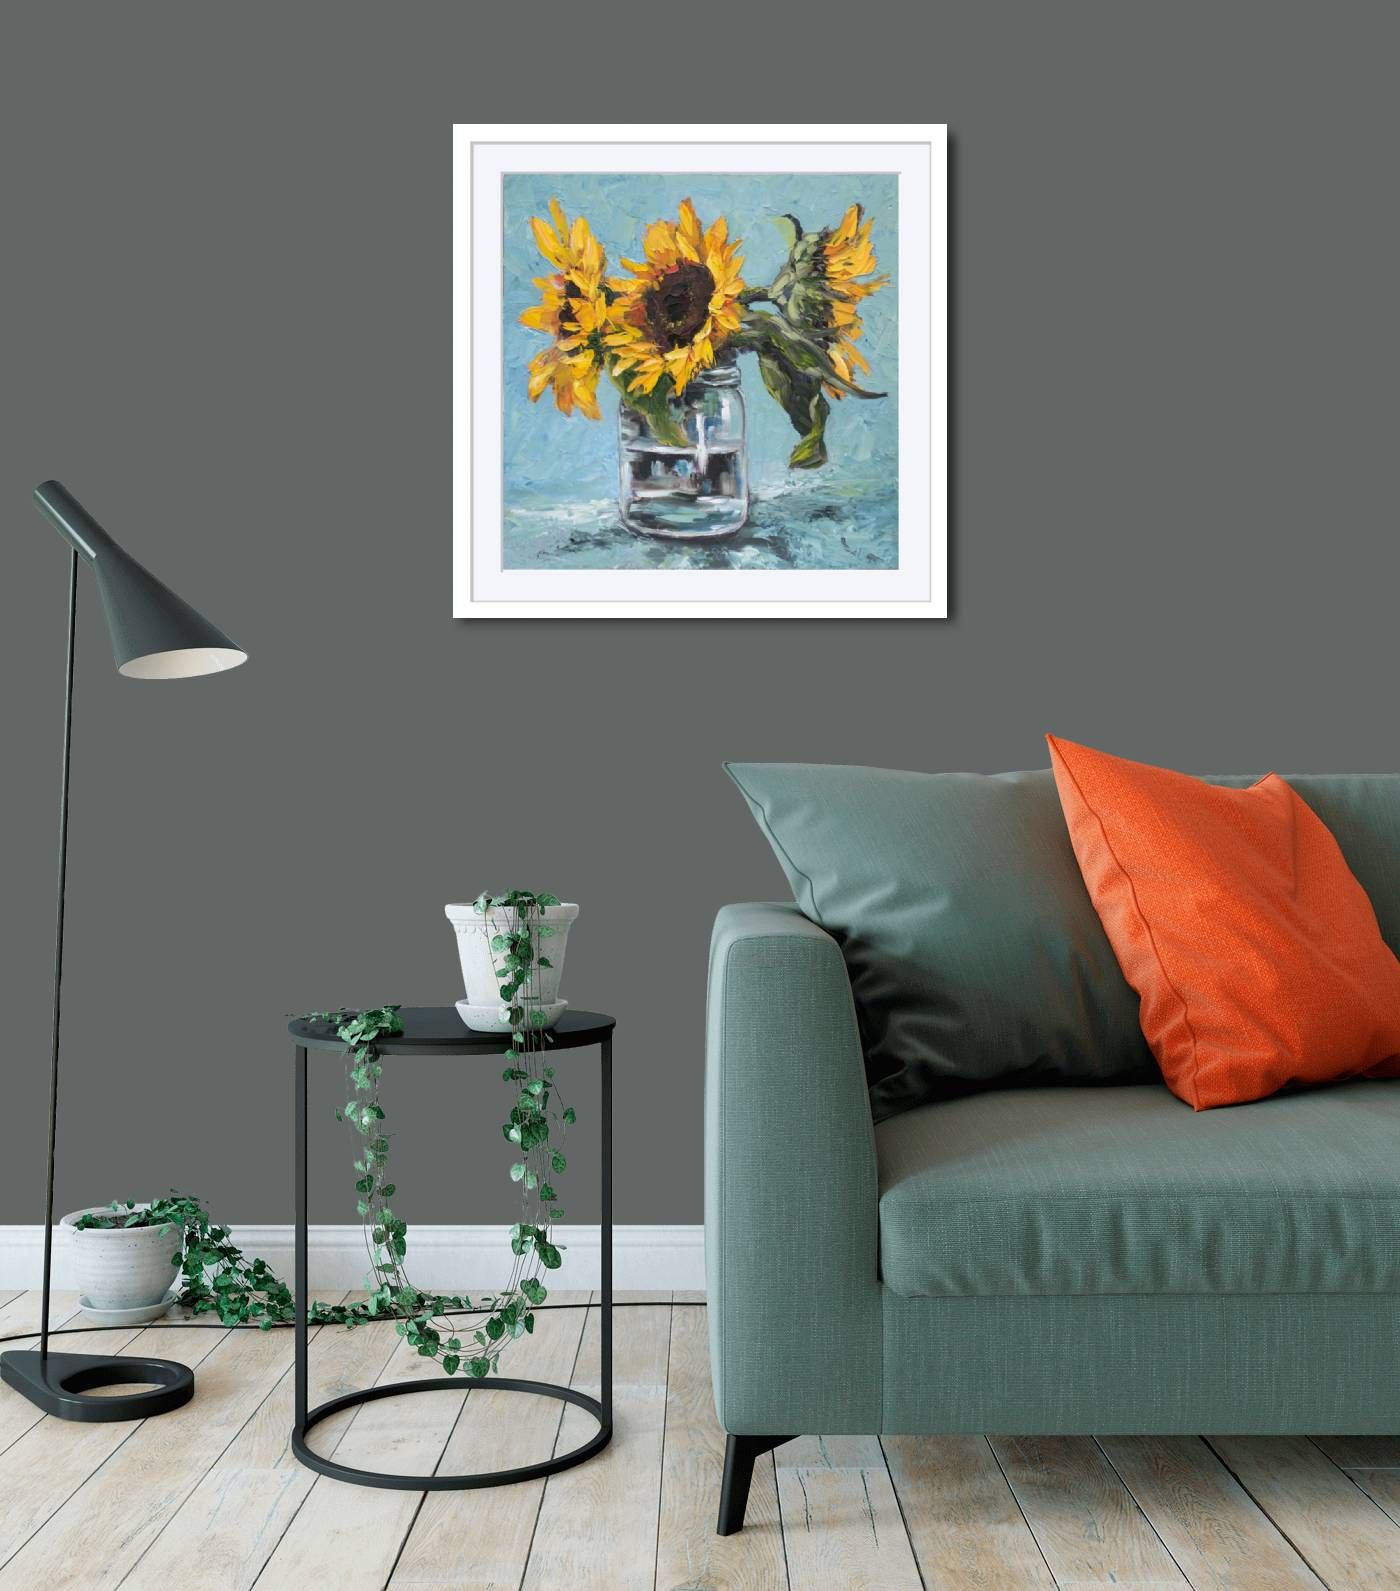 Extra Large - SUNFLOWERS by Karen Wilson